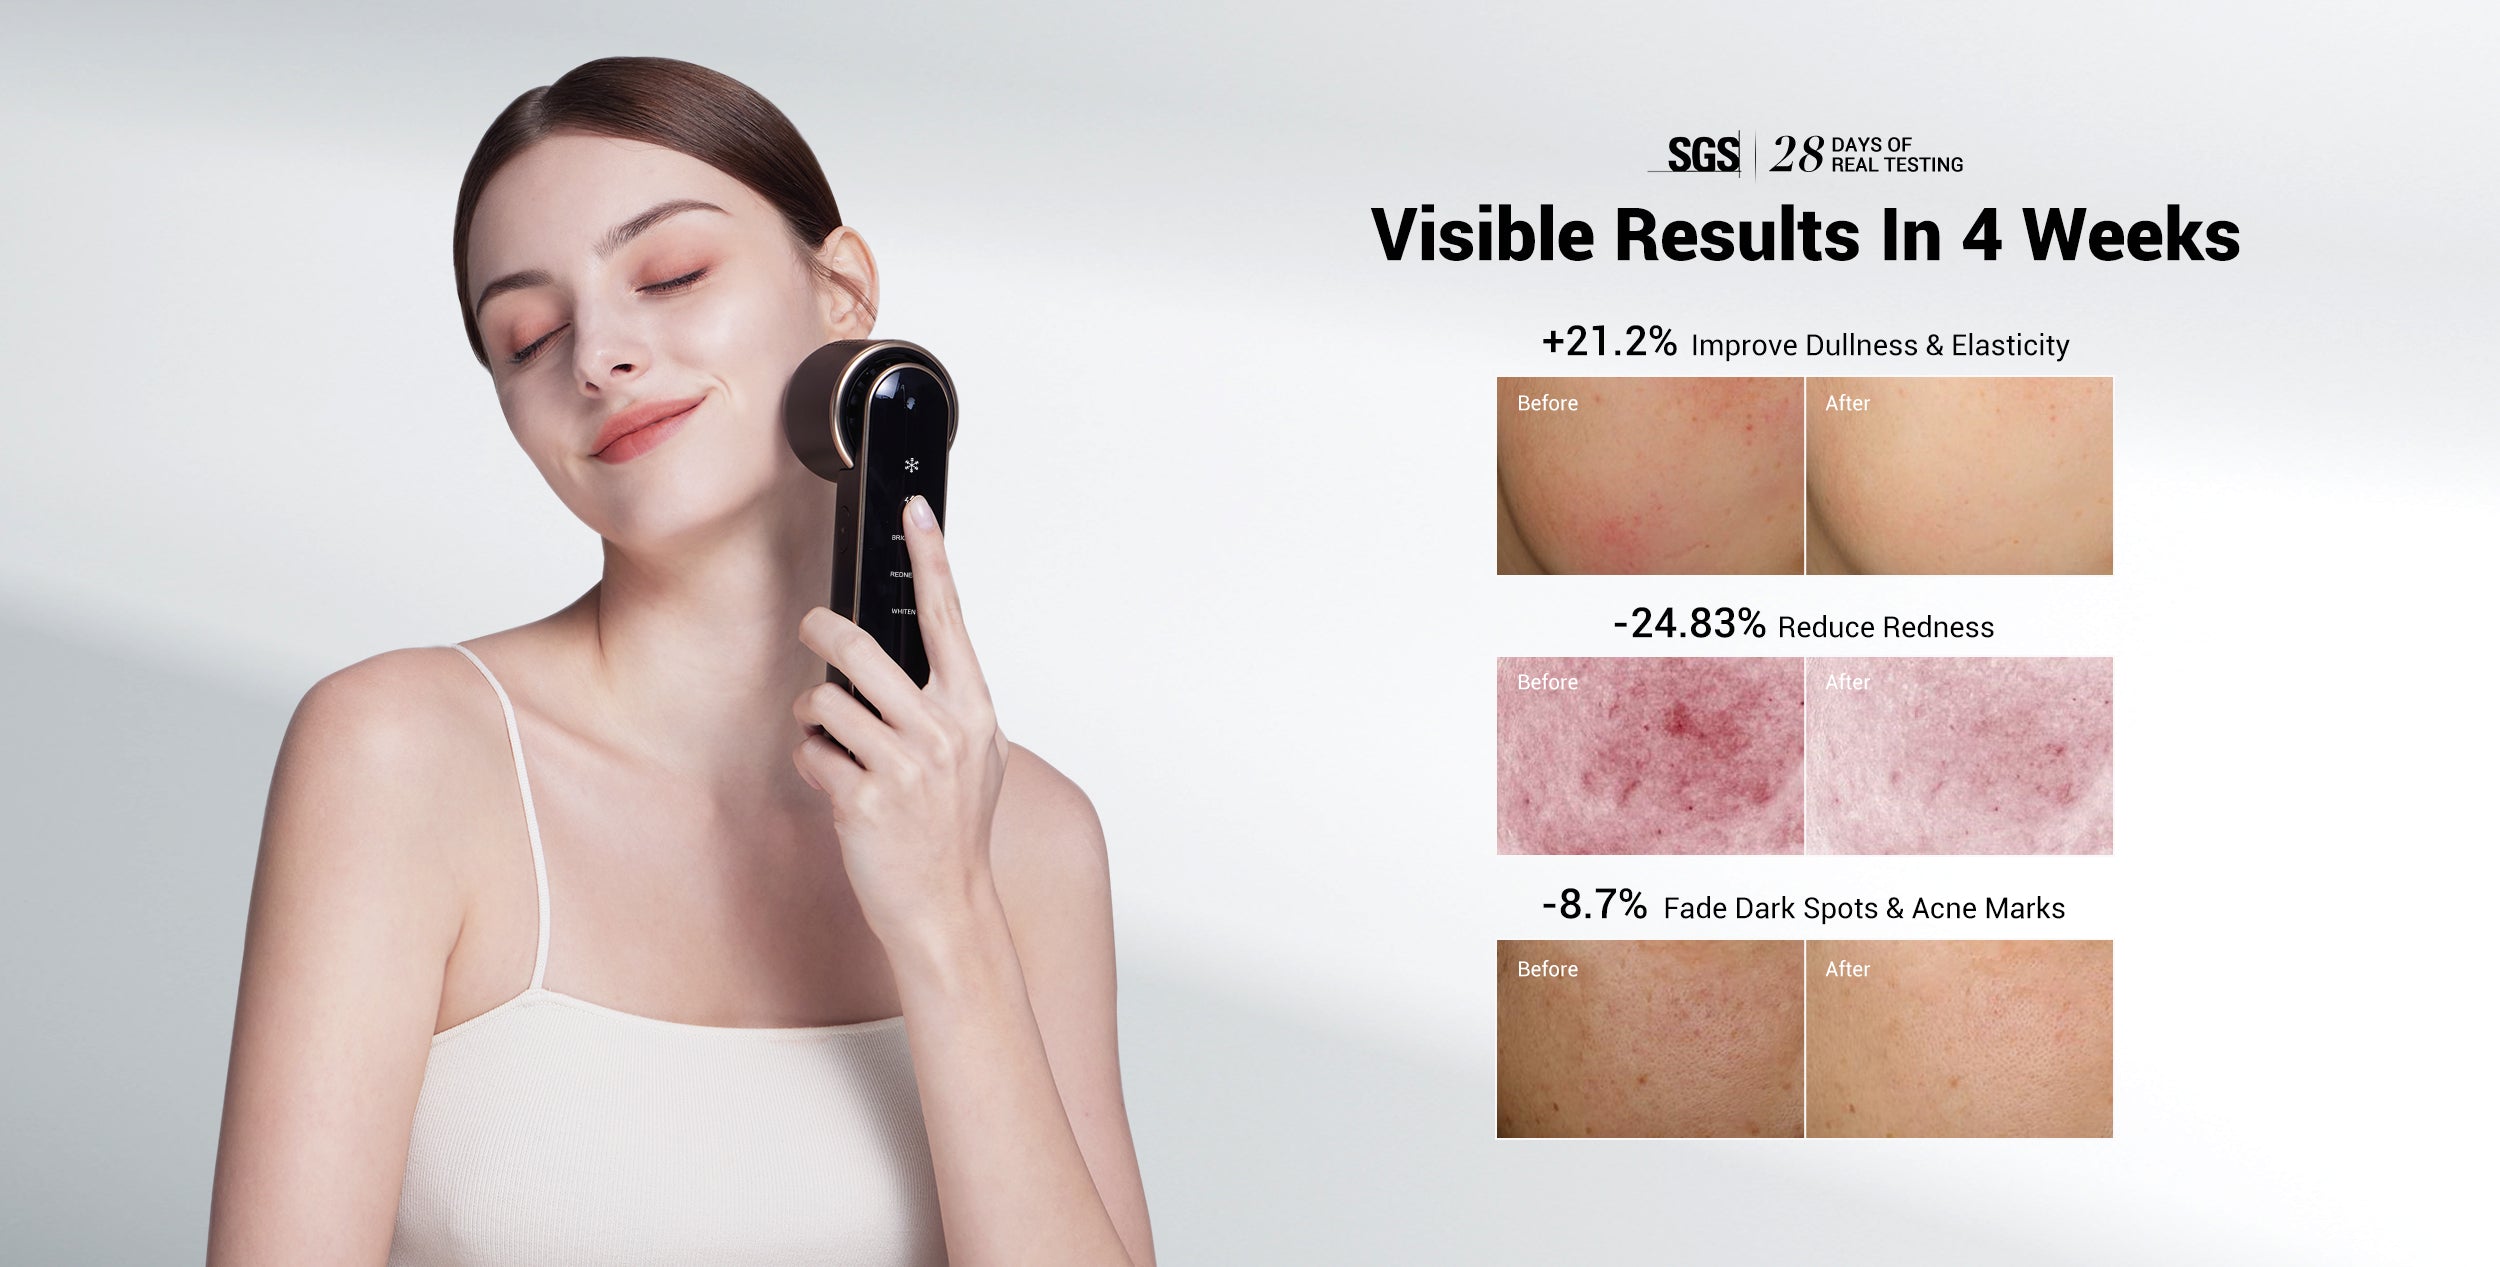 JOVS Blacken DPL Photorejuvenation Device results after 4 weeks showing improved skin elasticity and reduced redness and dark spots for a more radiant complexion.